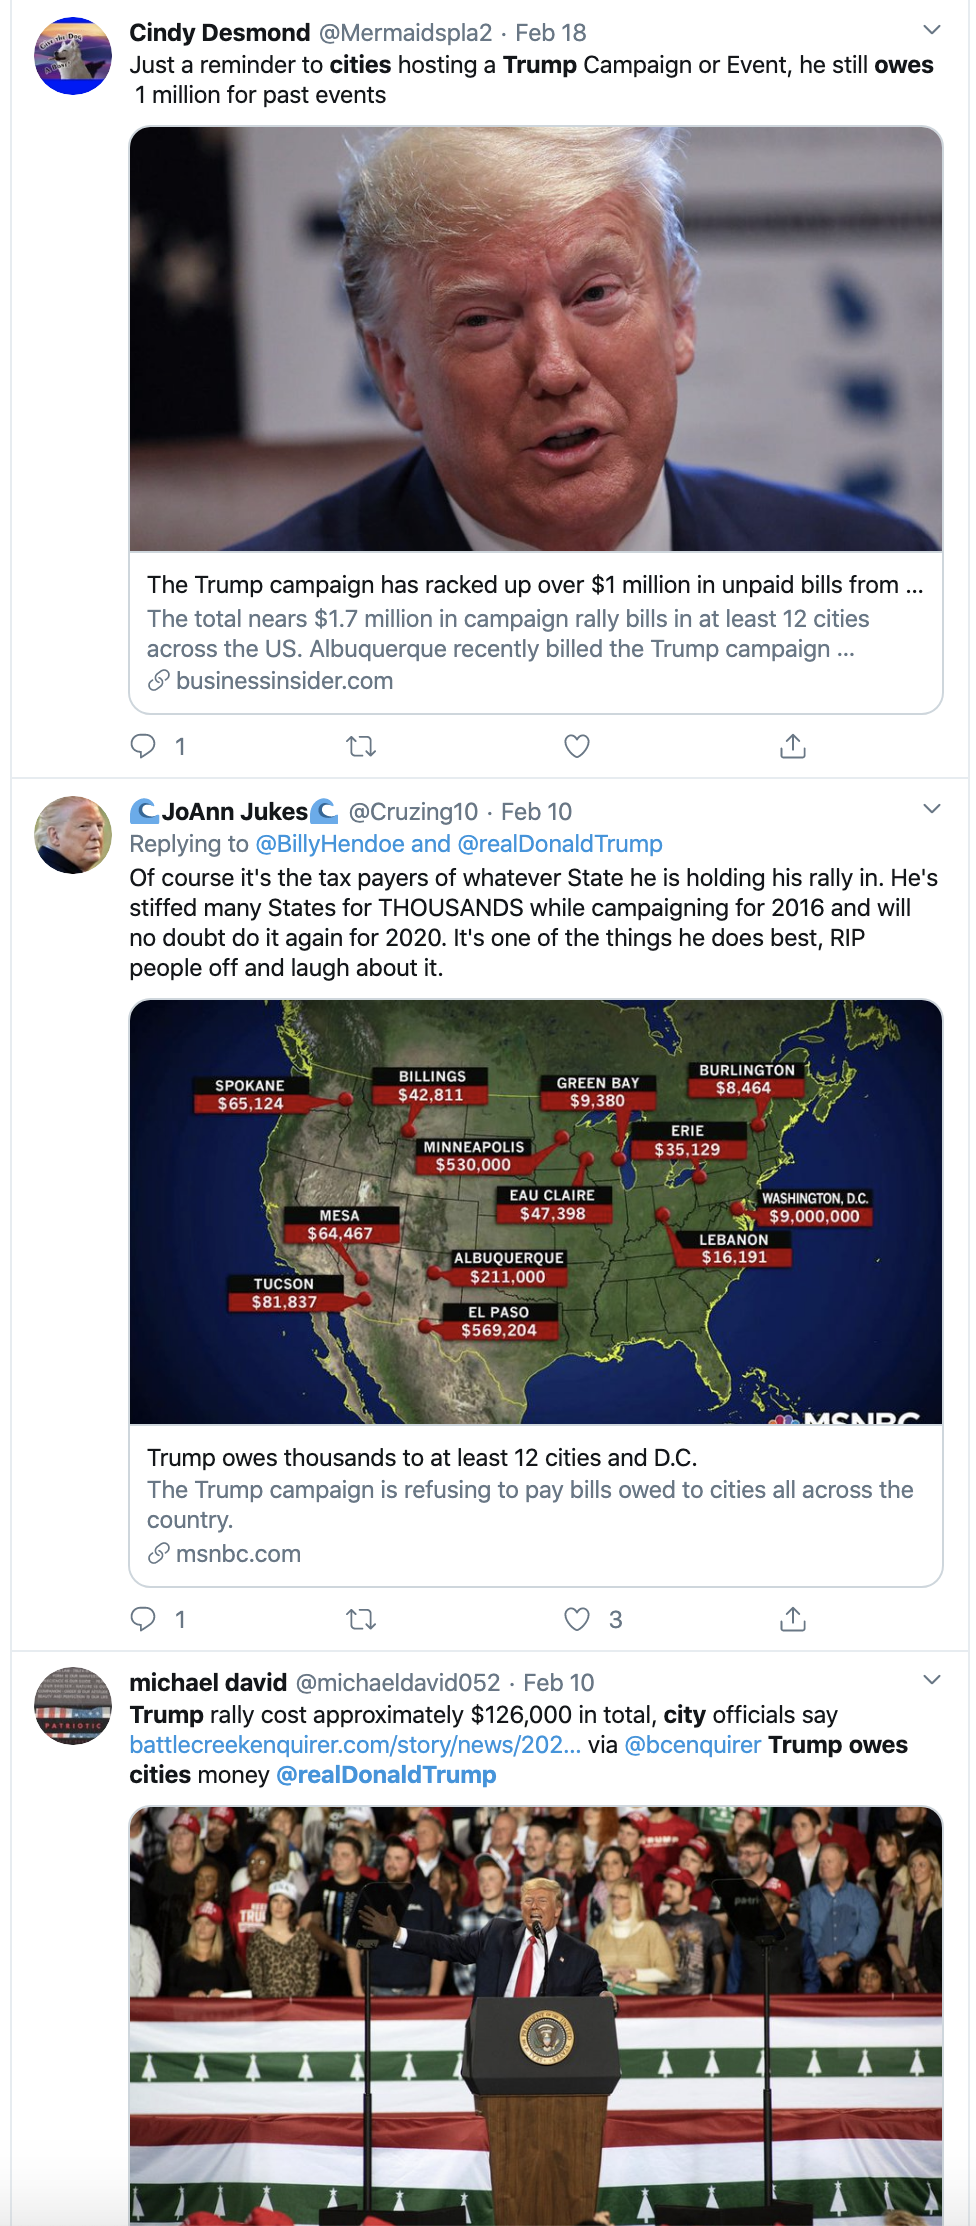 Screen-Shot-2020-02-19-at-2.44.07-PM $1.1M Trump Money Funnel Uncovered & Announced Corruption Crime Featured Politics Top Stories 